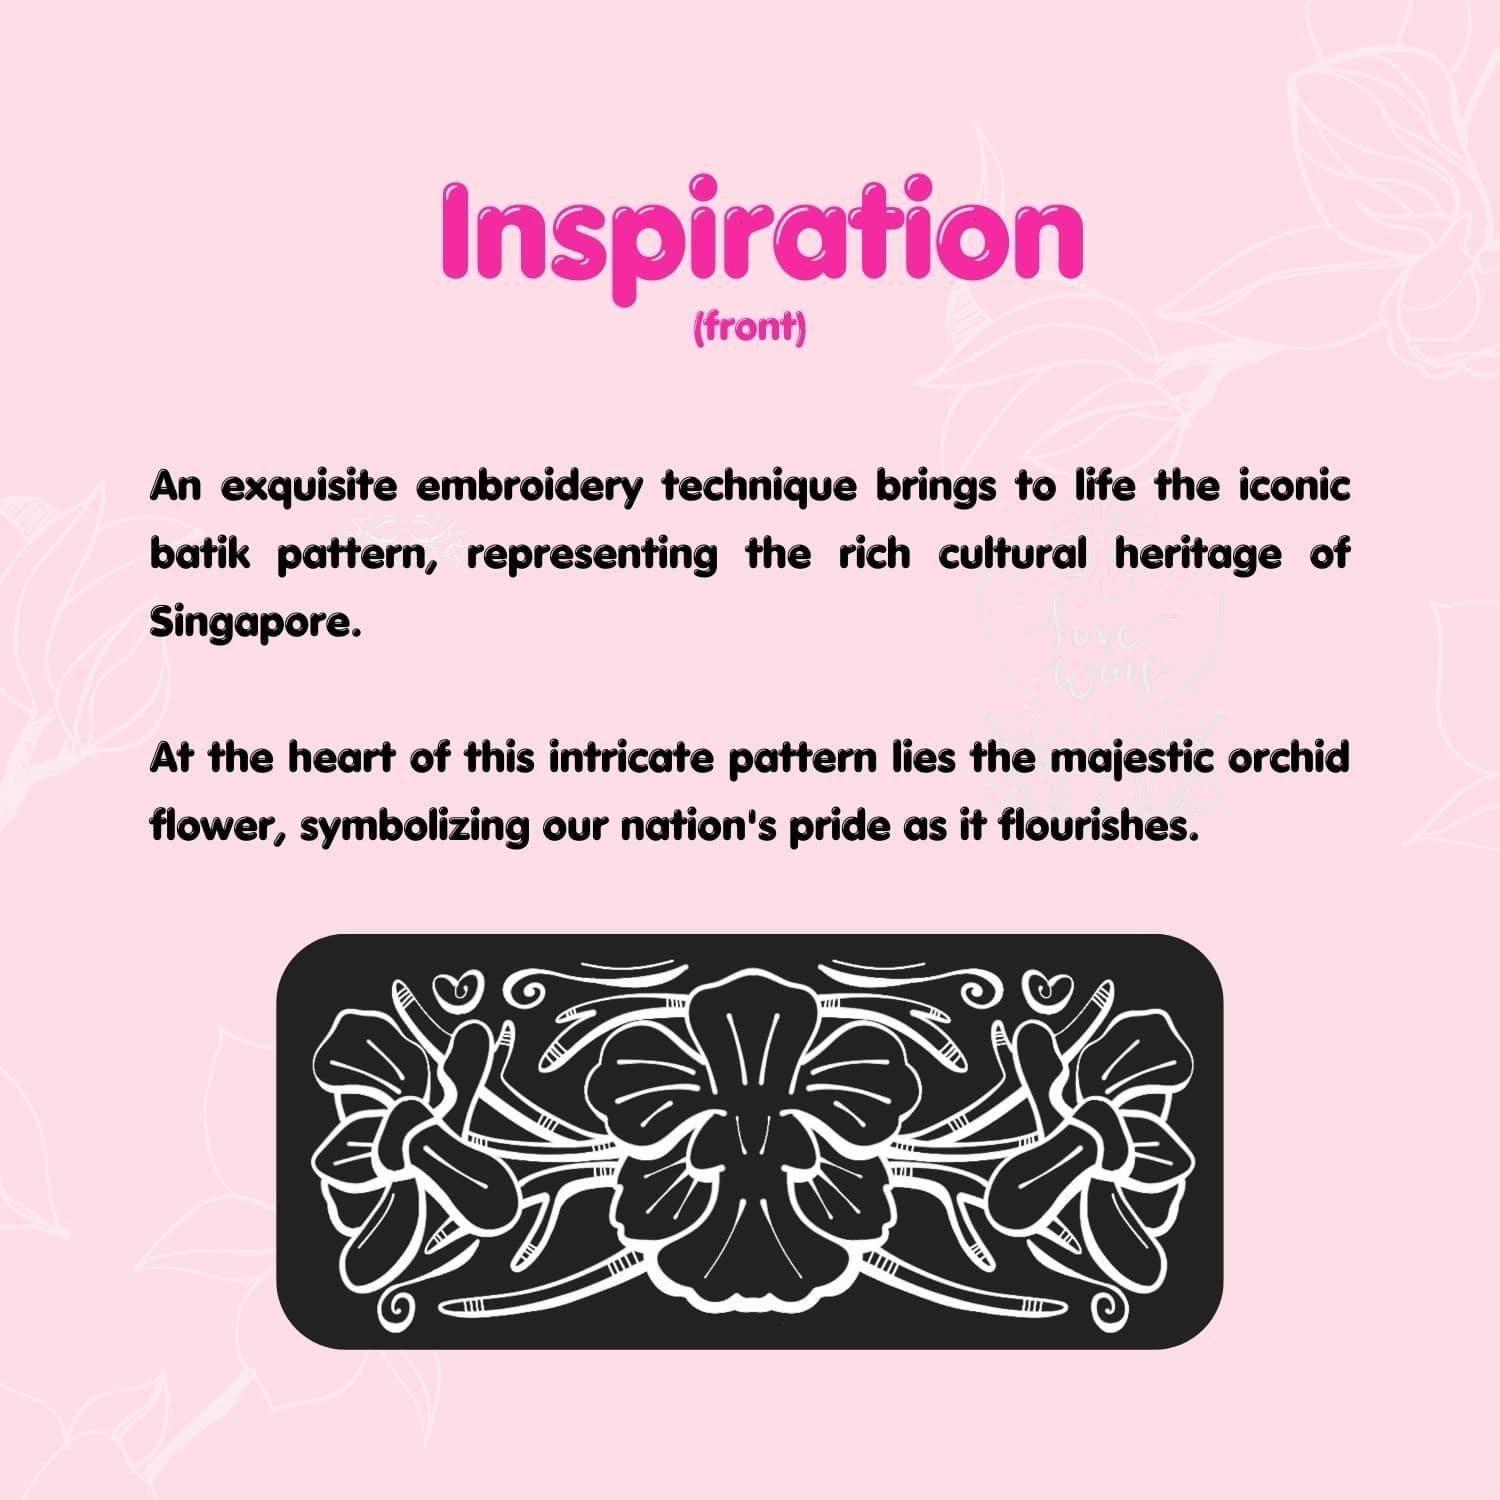 Explore the TOMSCOUT Flourish Inspiration DESIGN CONCEPT - LGBT Pride Kits from Singapore, showcasing the creative front and back designs that capture the essence of LGBT pride and inspiration.